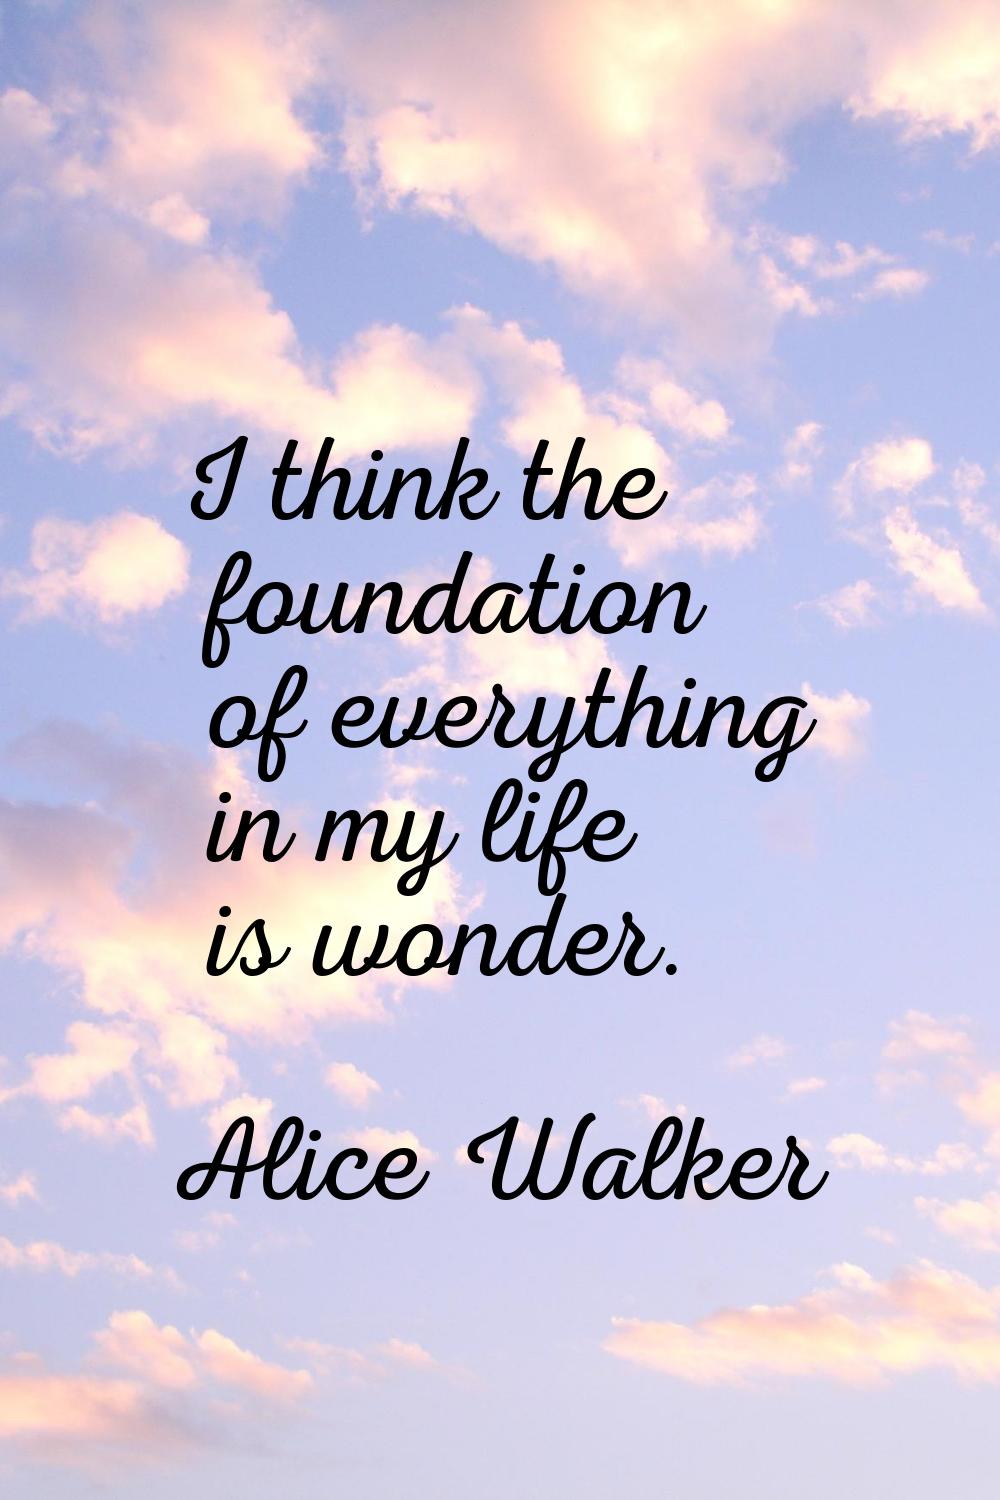 I think the foundation of everything in my life is wonder.